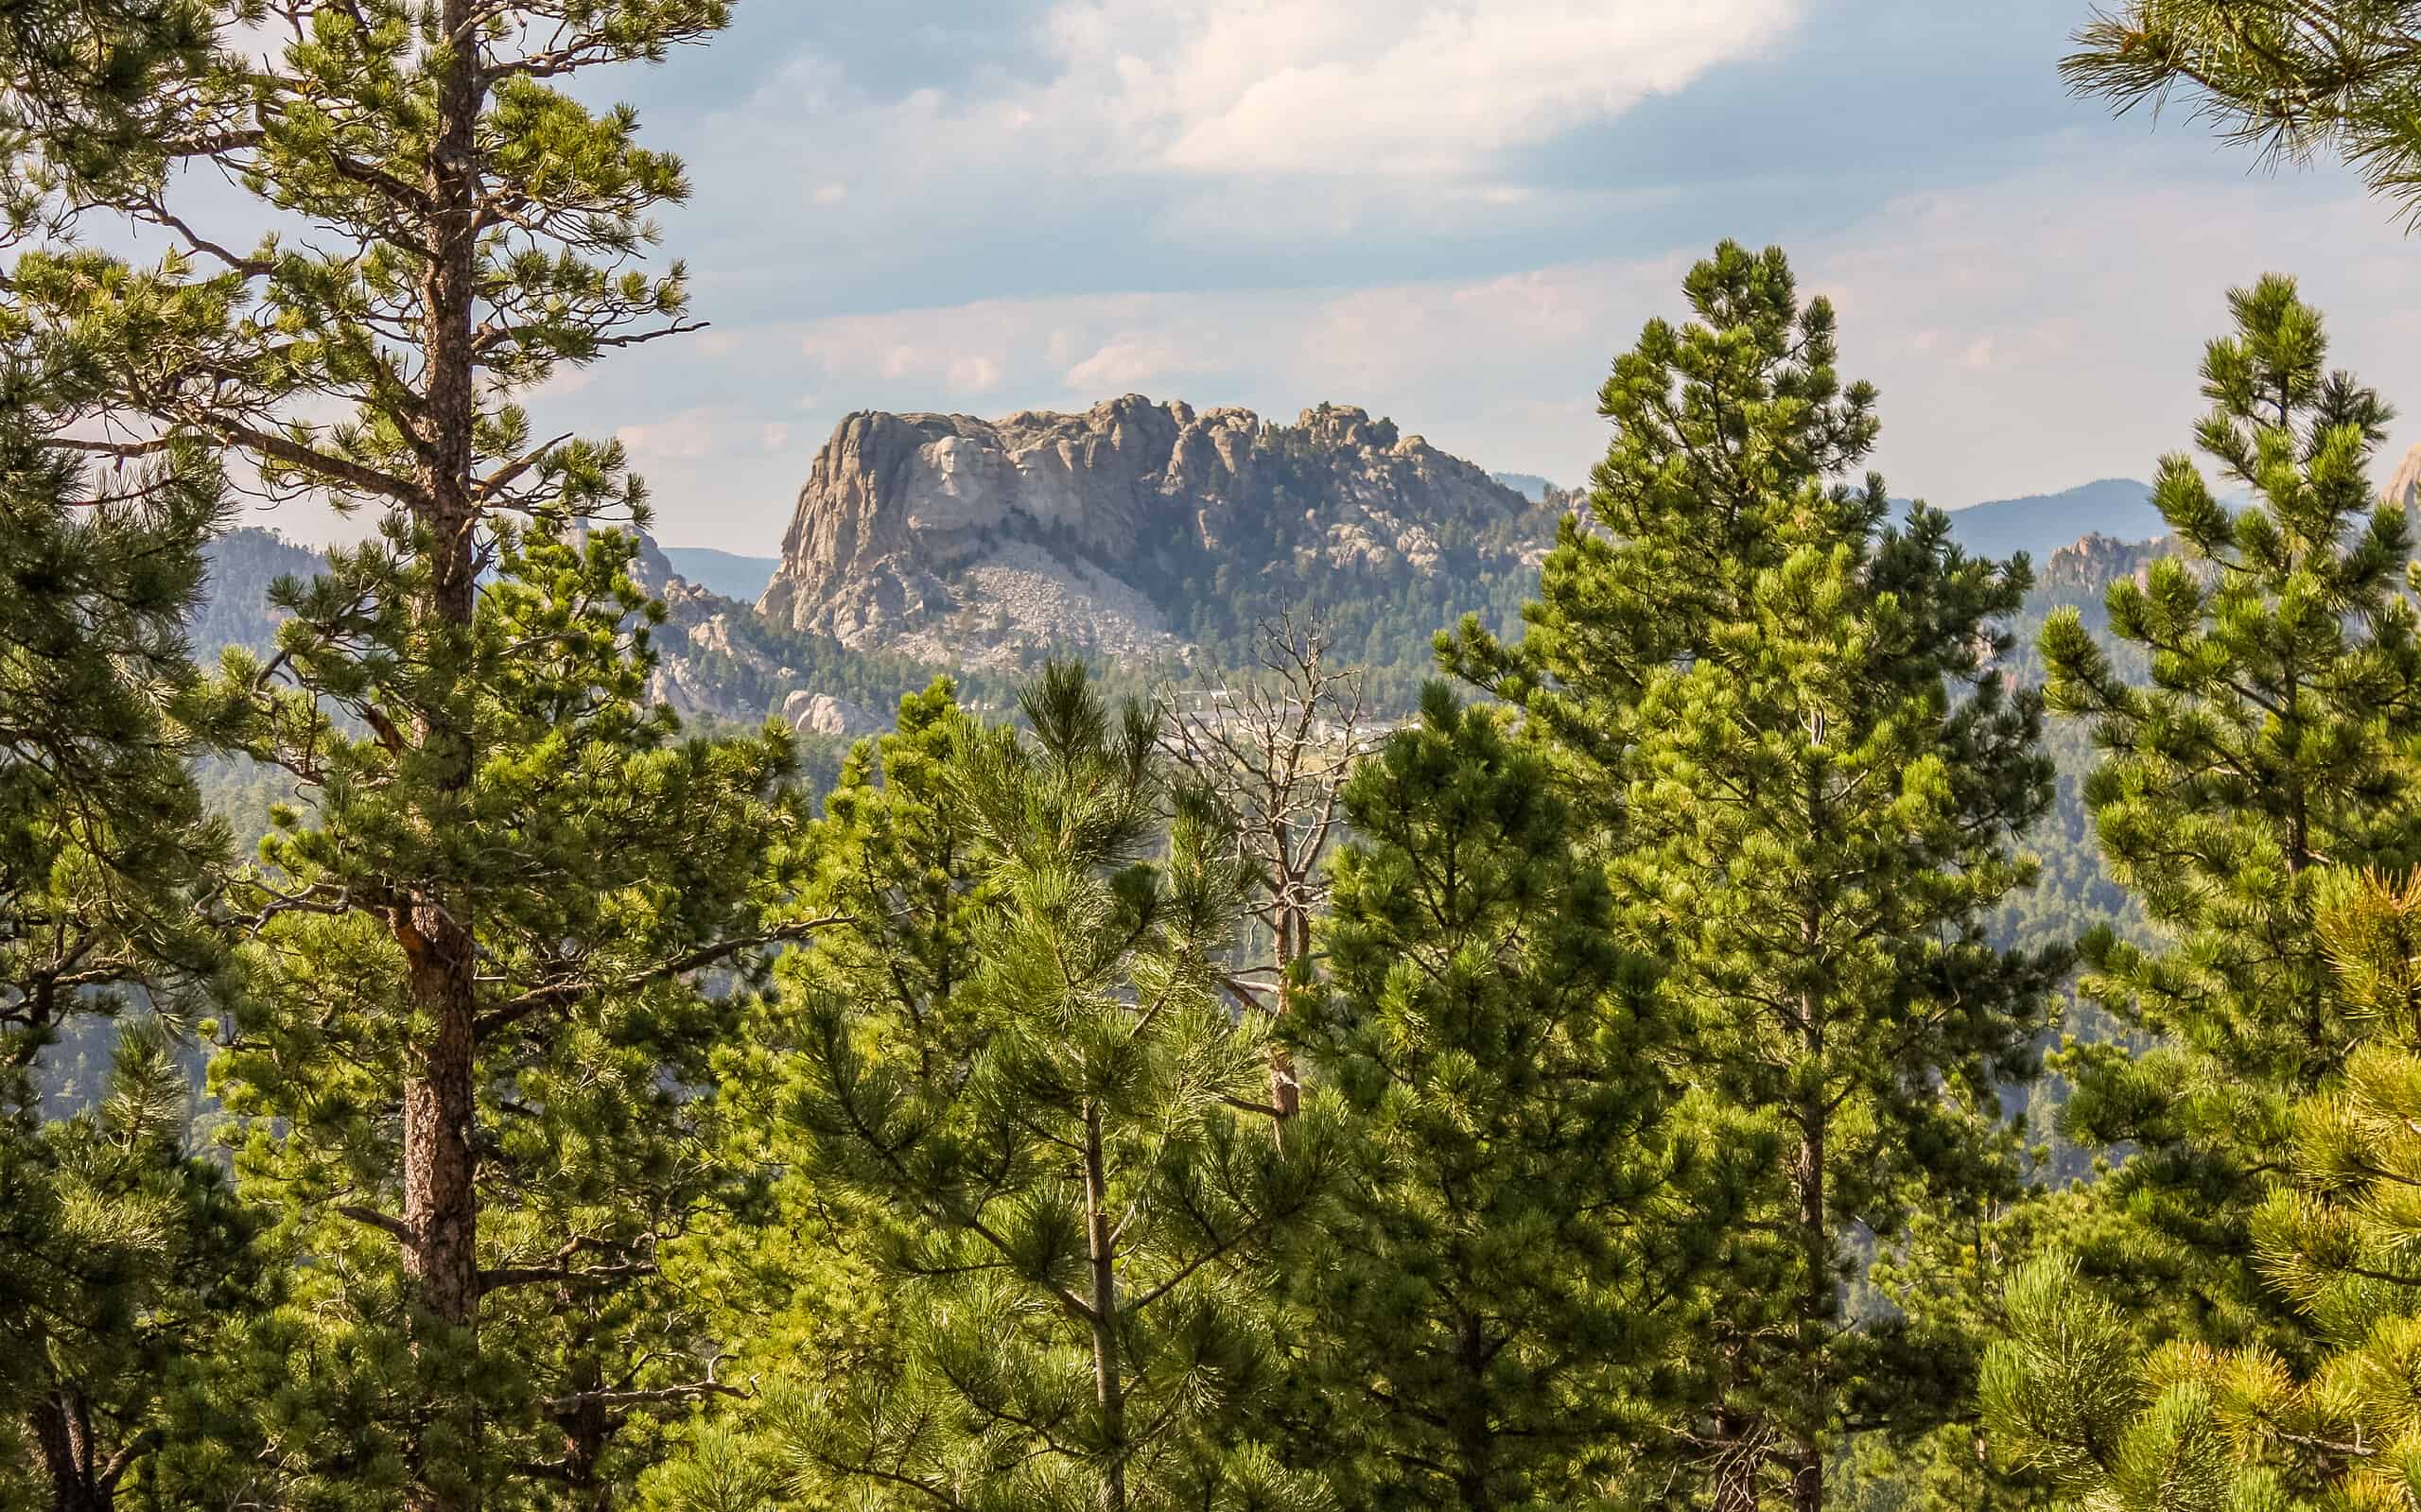 Distant View of Mount Rushmore in Black Hills forest South Dakota